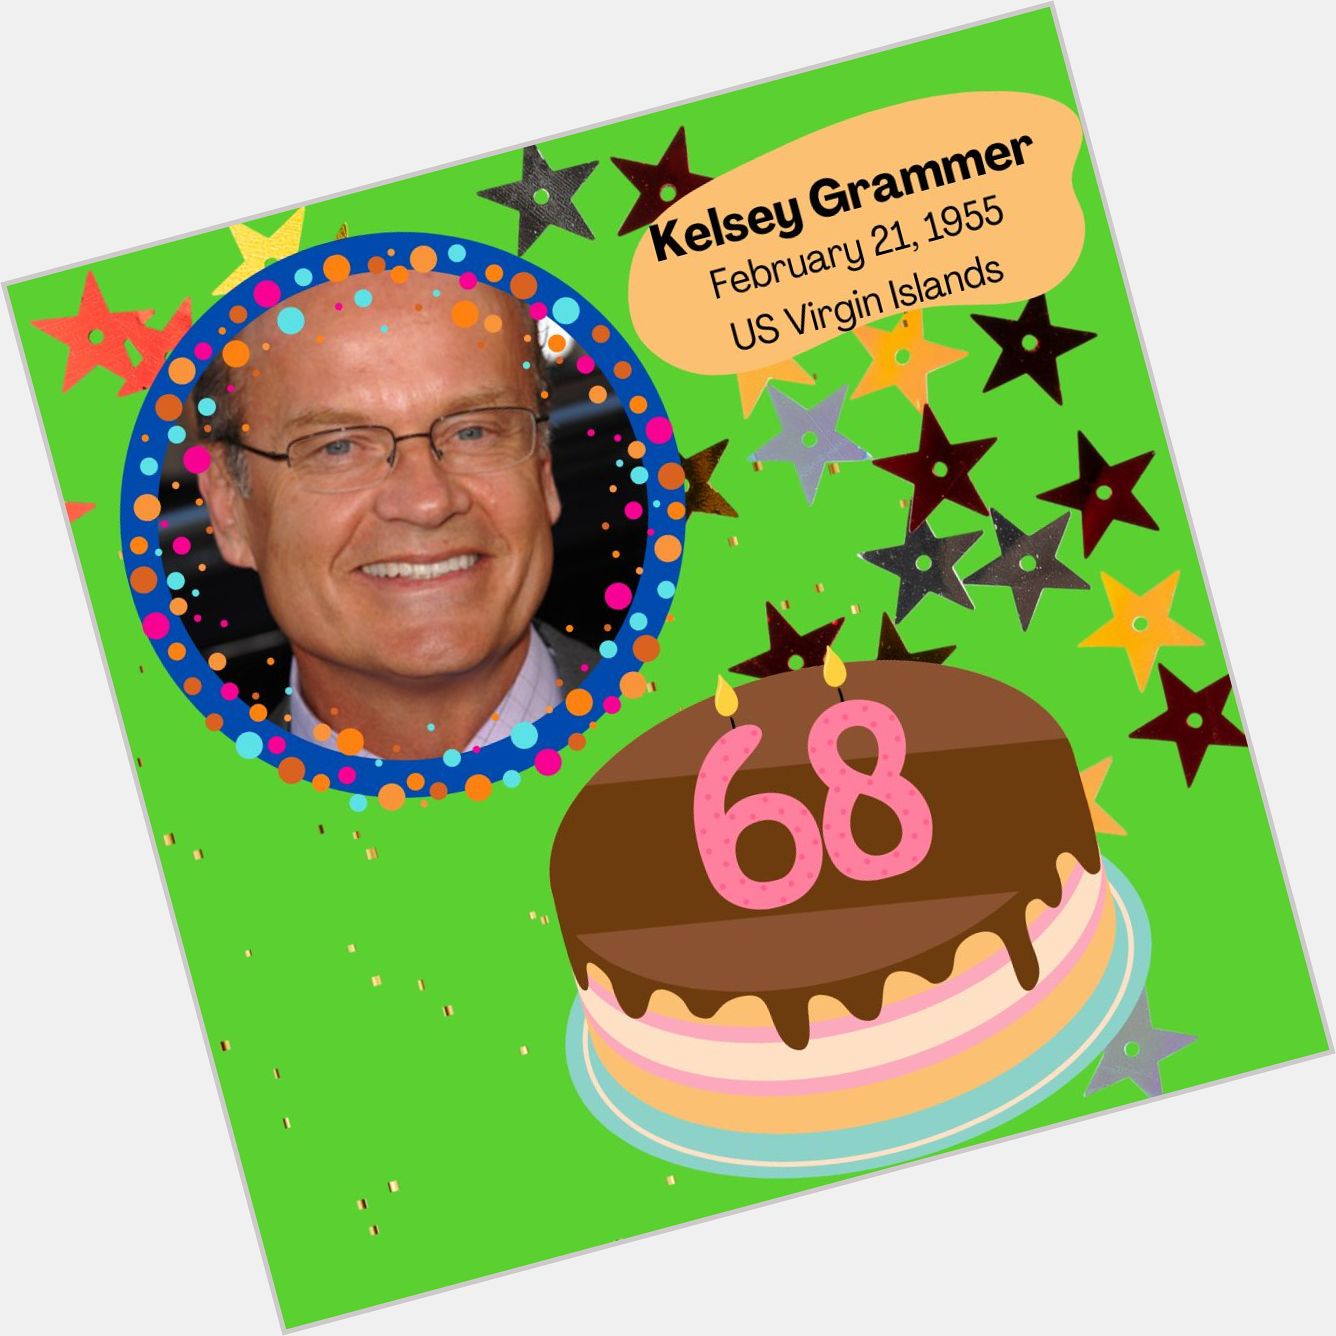 HAPPY BIRTHDAY and CHEERS to Kelsey Grammer... 68 and feeling great!  